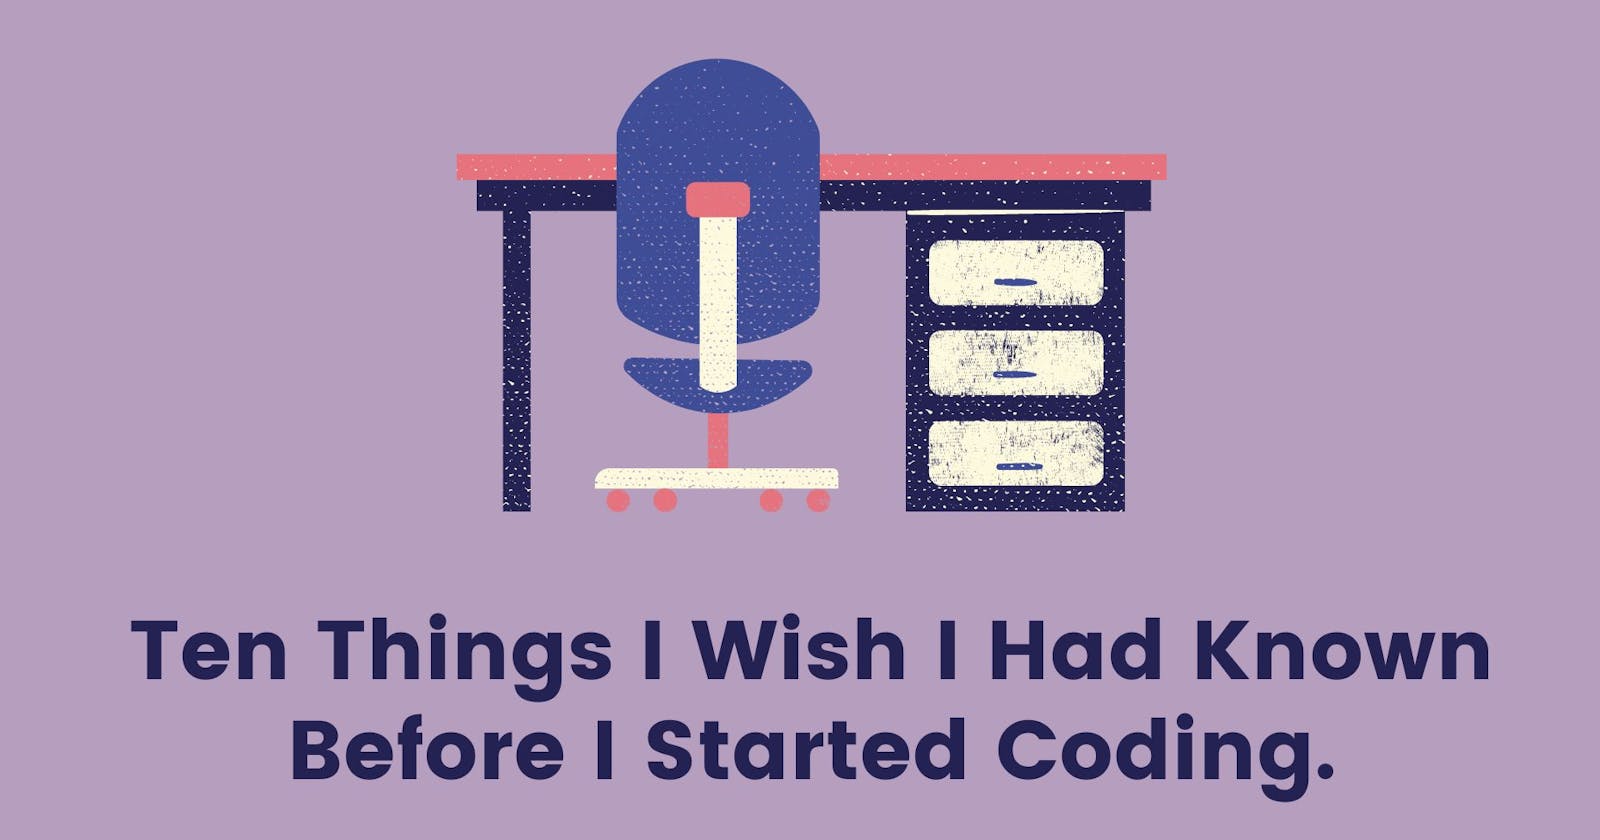 Ten Things I Wish I Had Known Before I Started Coding.